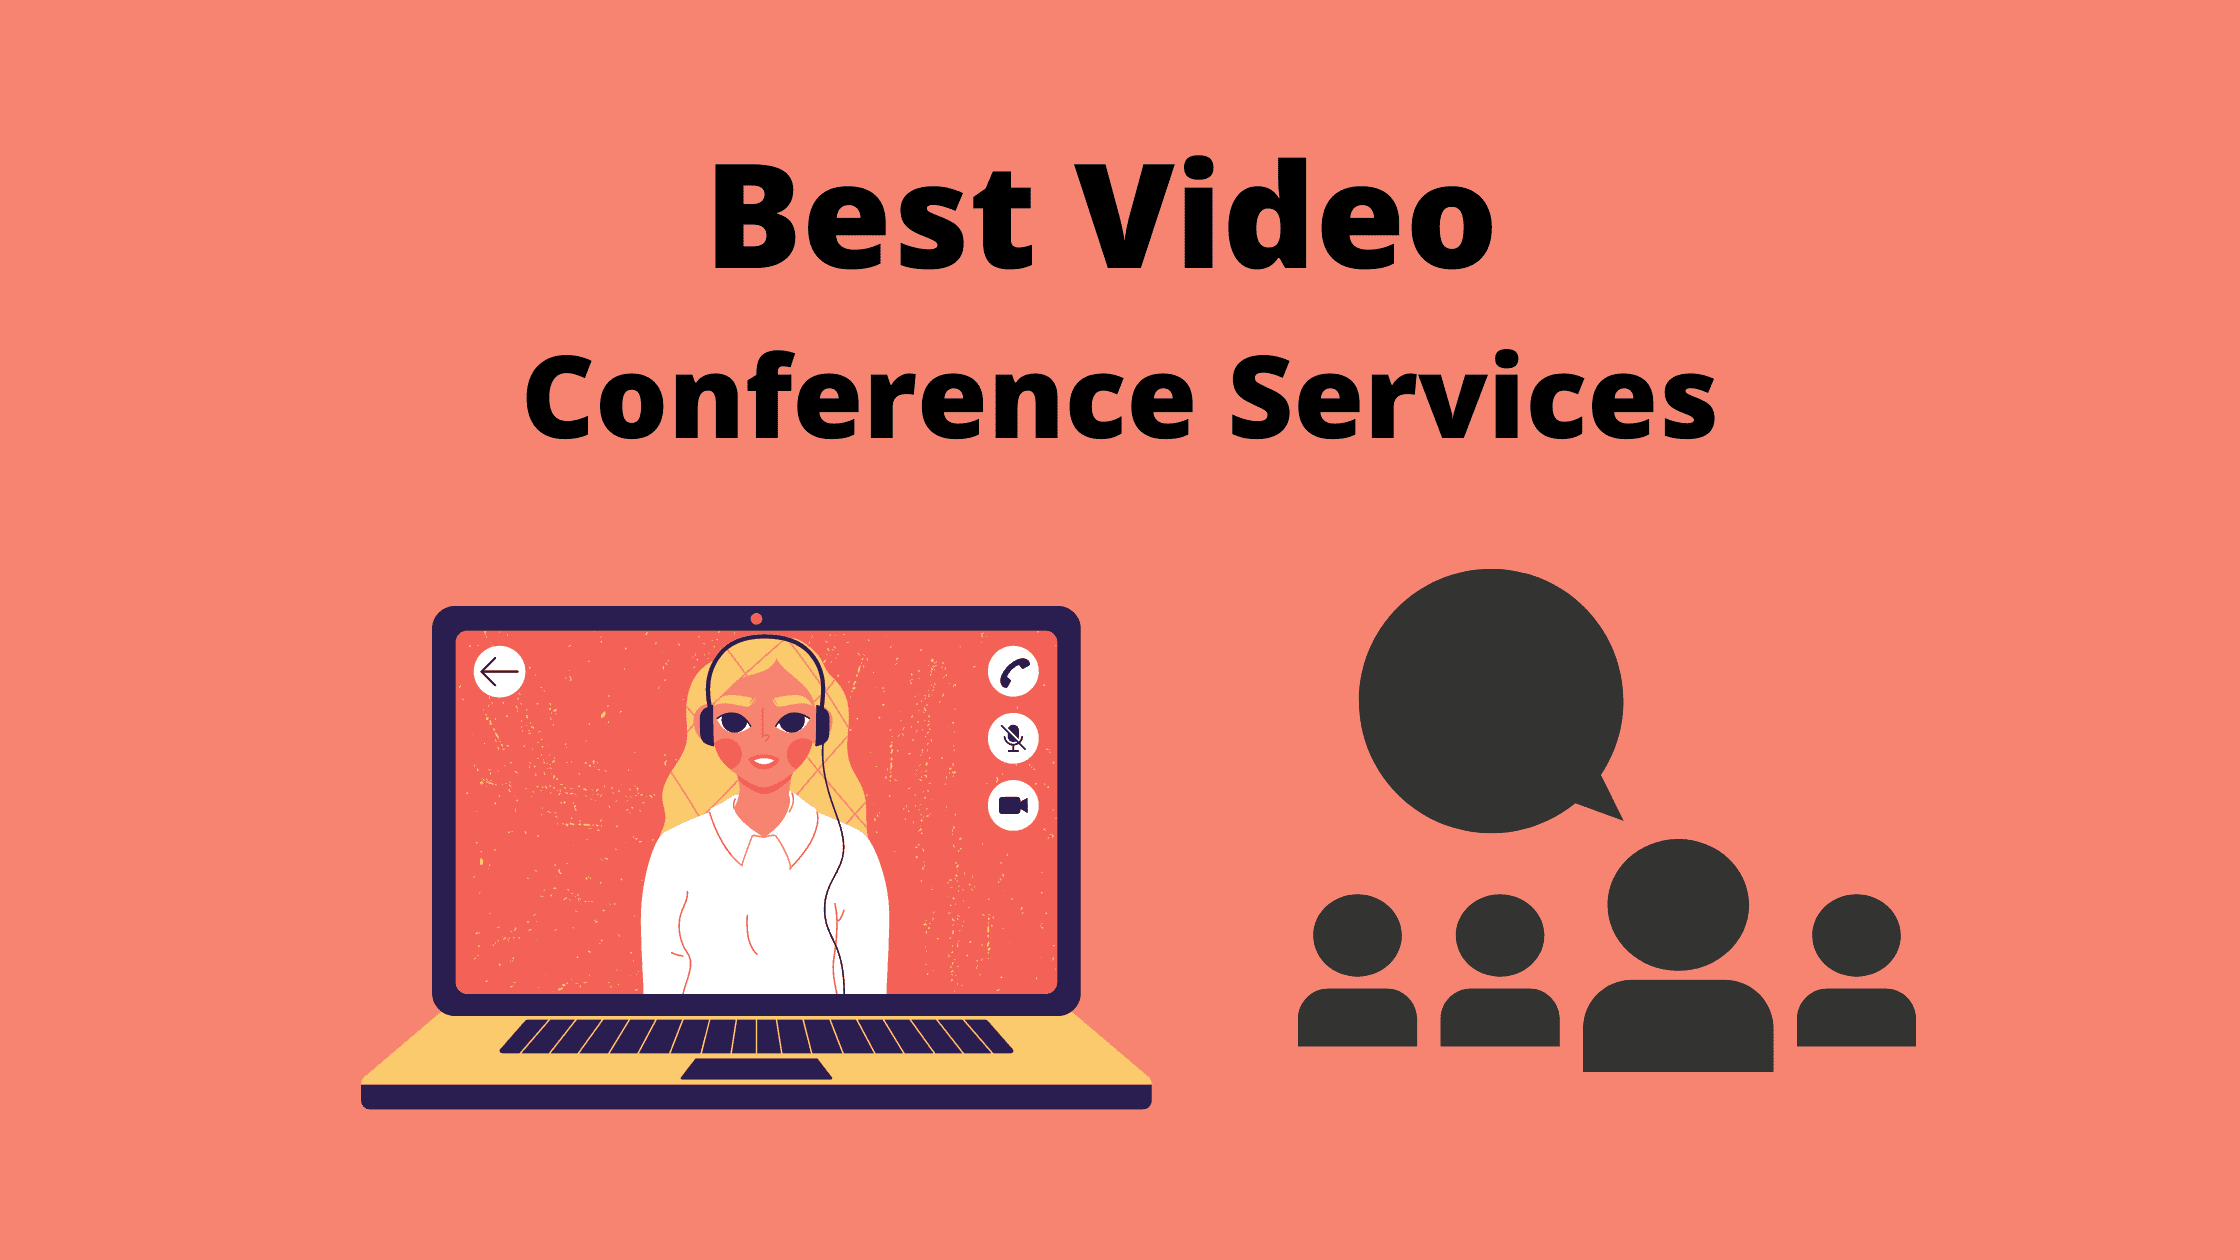 Best Video Conference Services